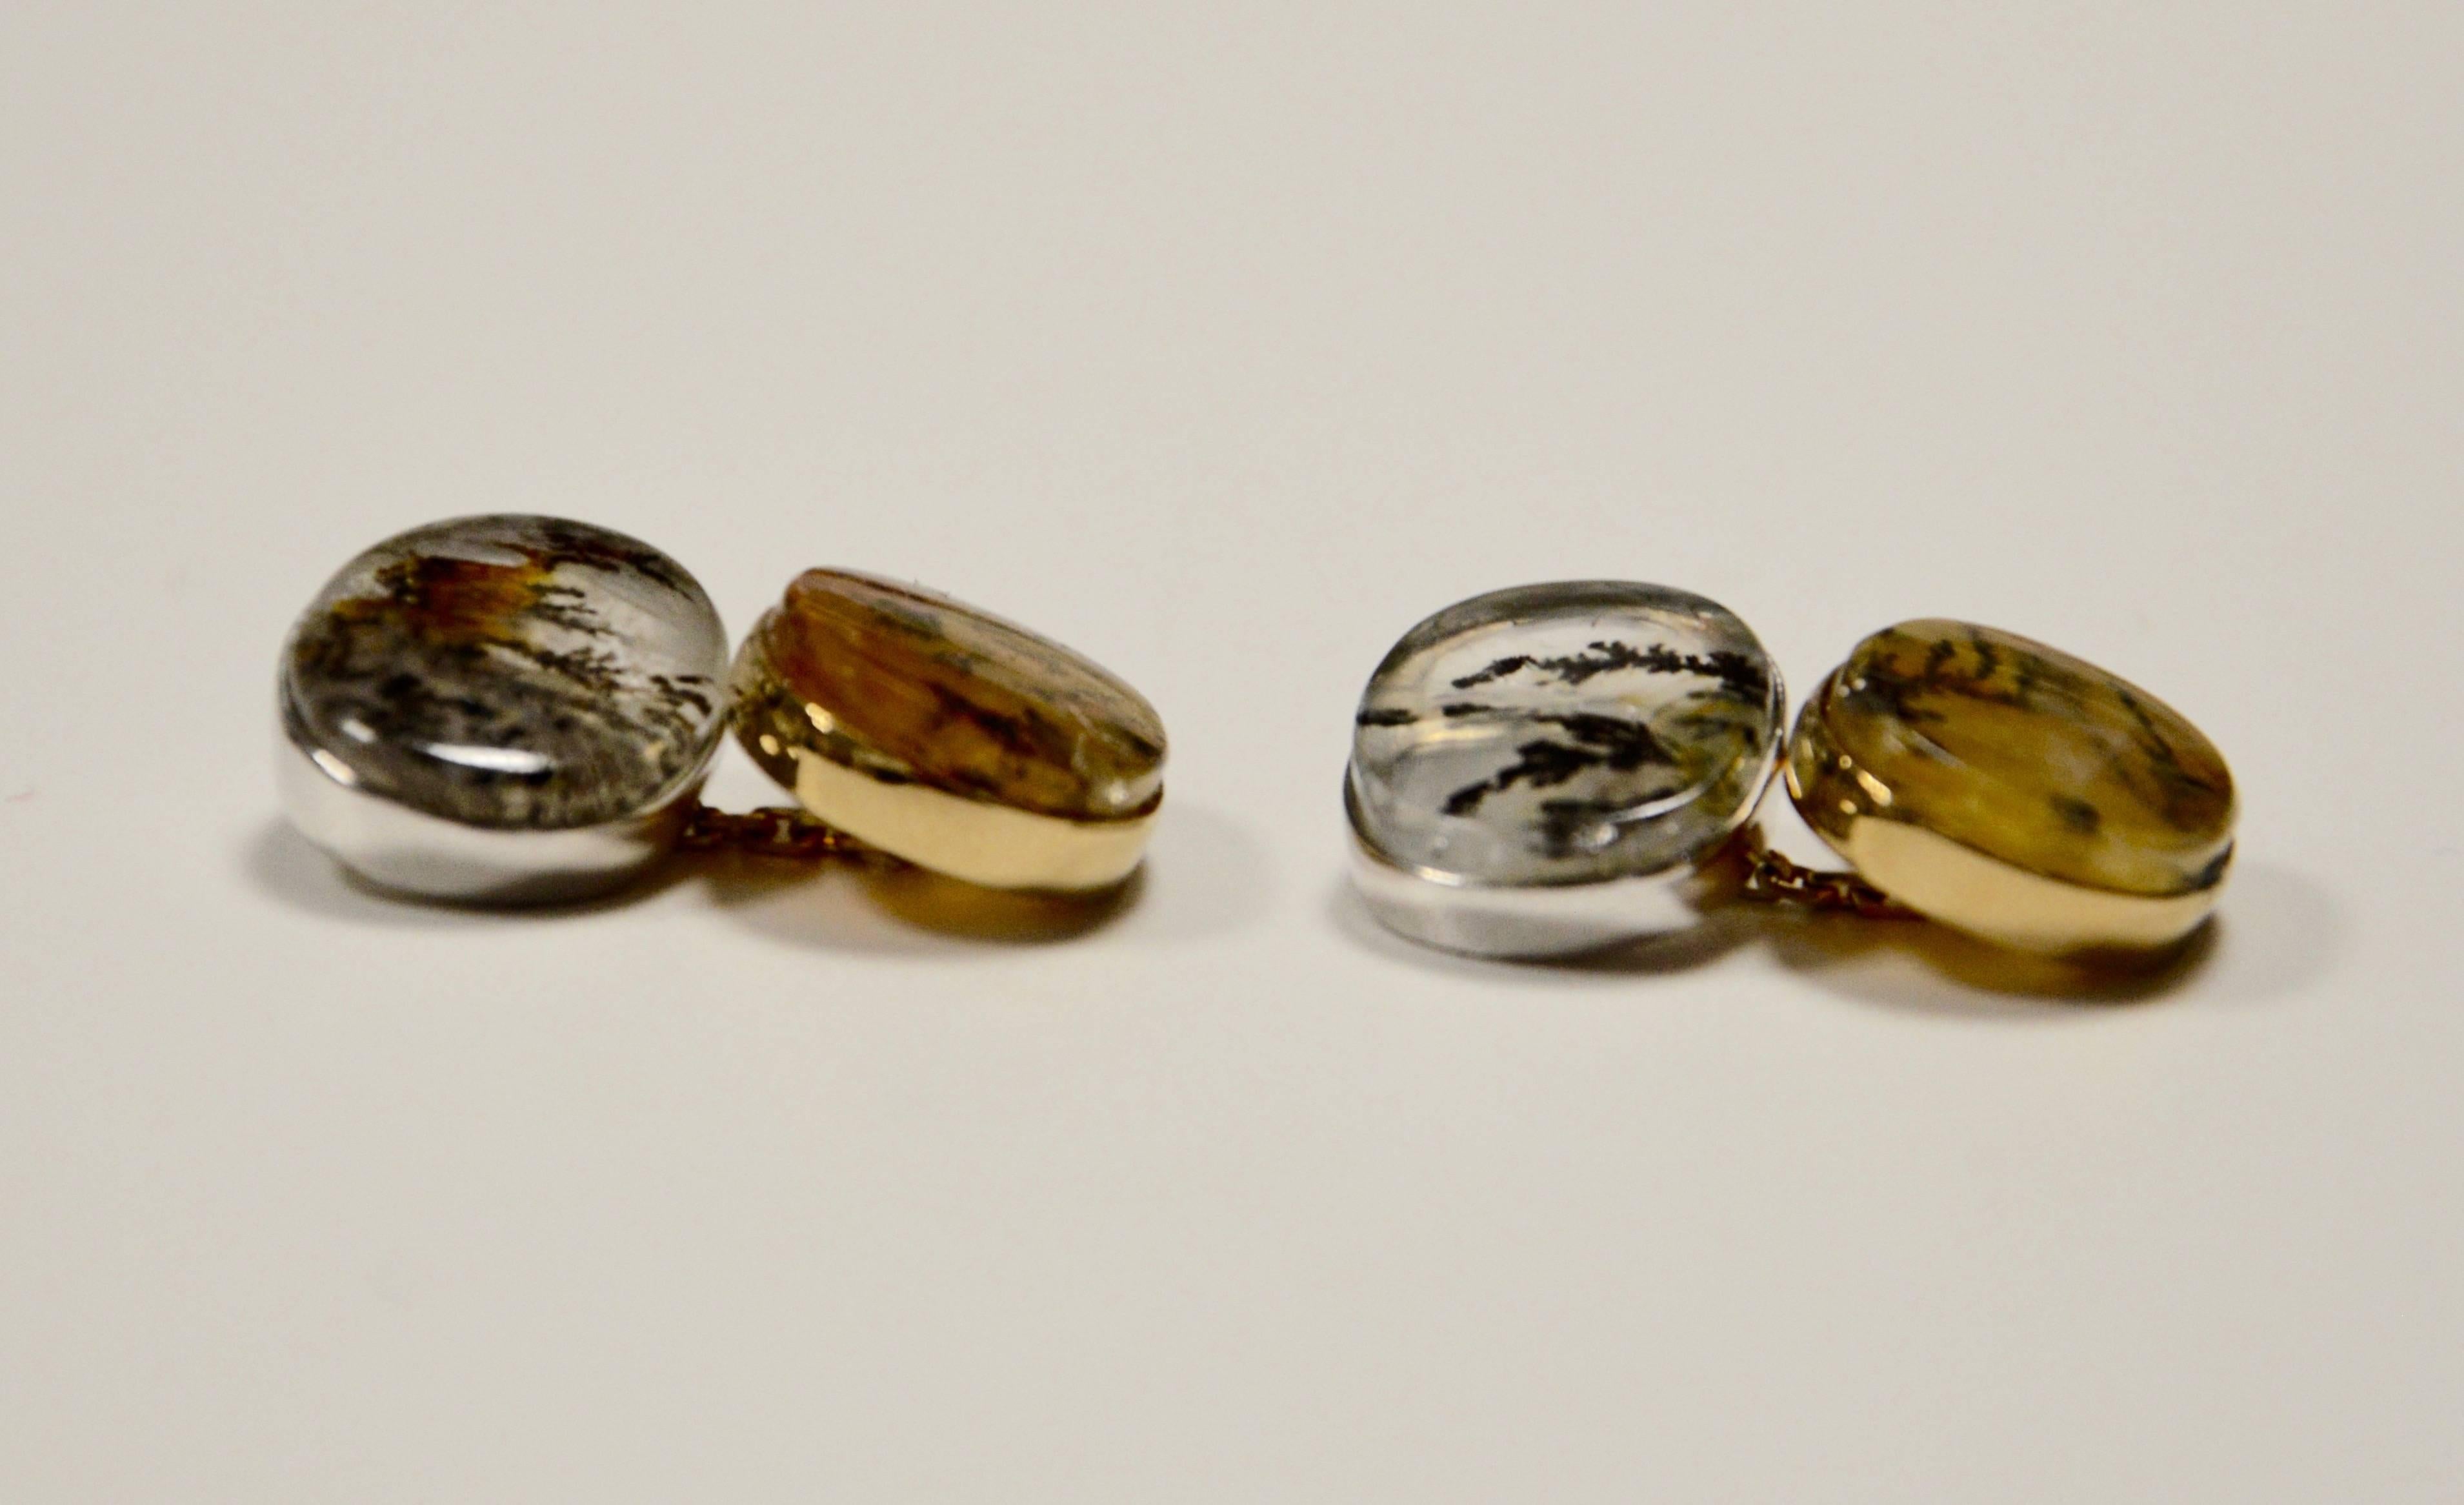 The Xavier pair of Cuff Links are in 18K White gold and yellow gold, set with 4 dendritic agates.

As a familly tradition, Valerie Danenberg is a jewelry designer and a gemmologist inspired by the Art Deco.

Reviving the purest tradition of antique